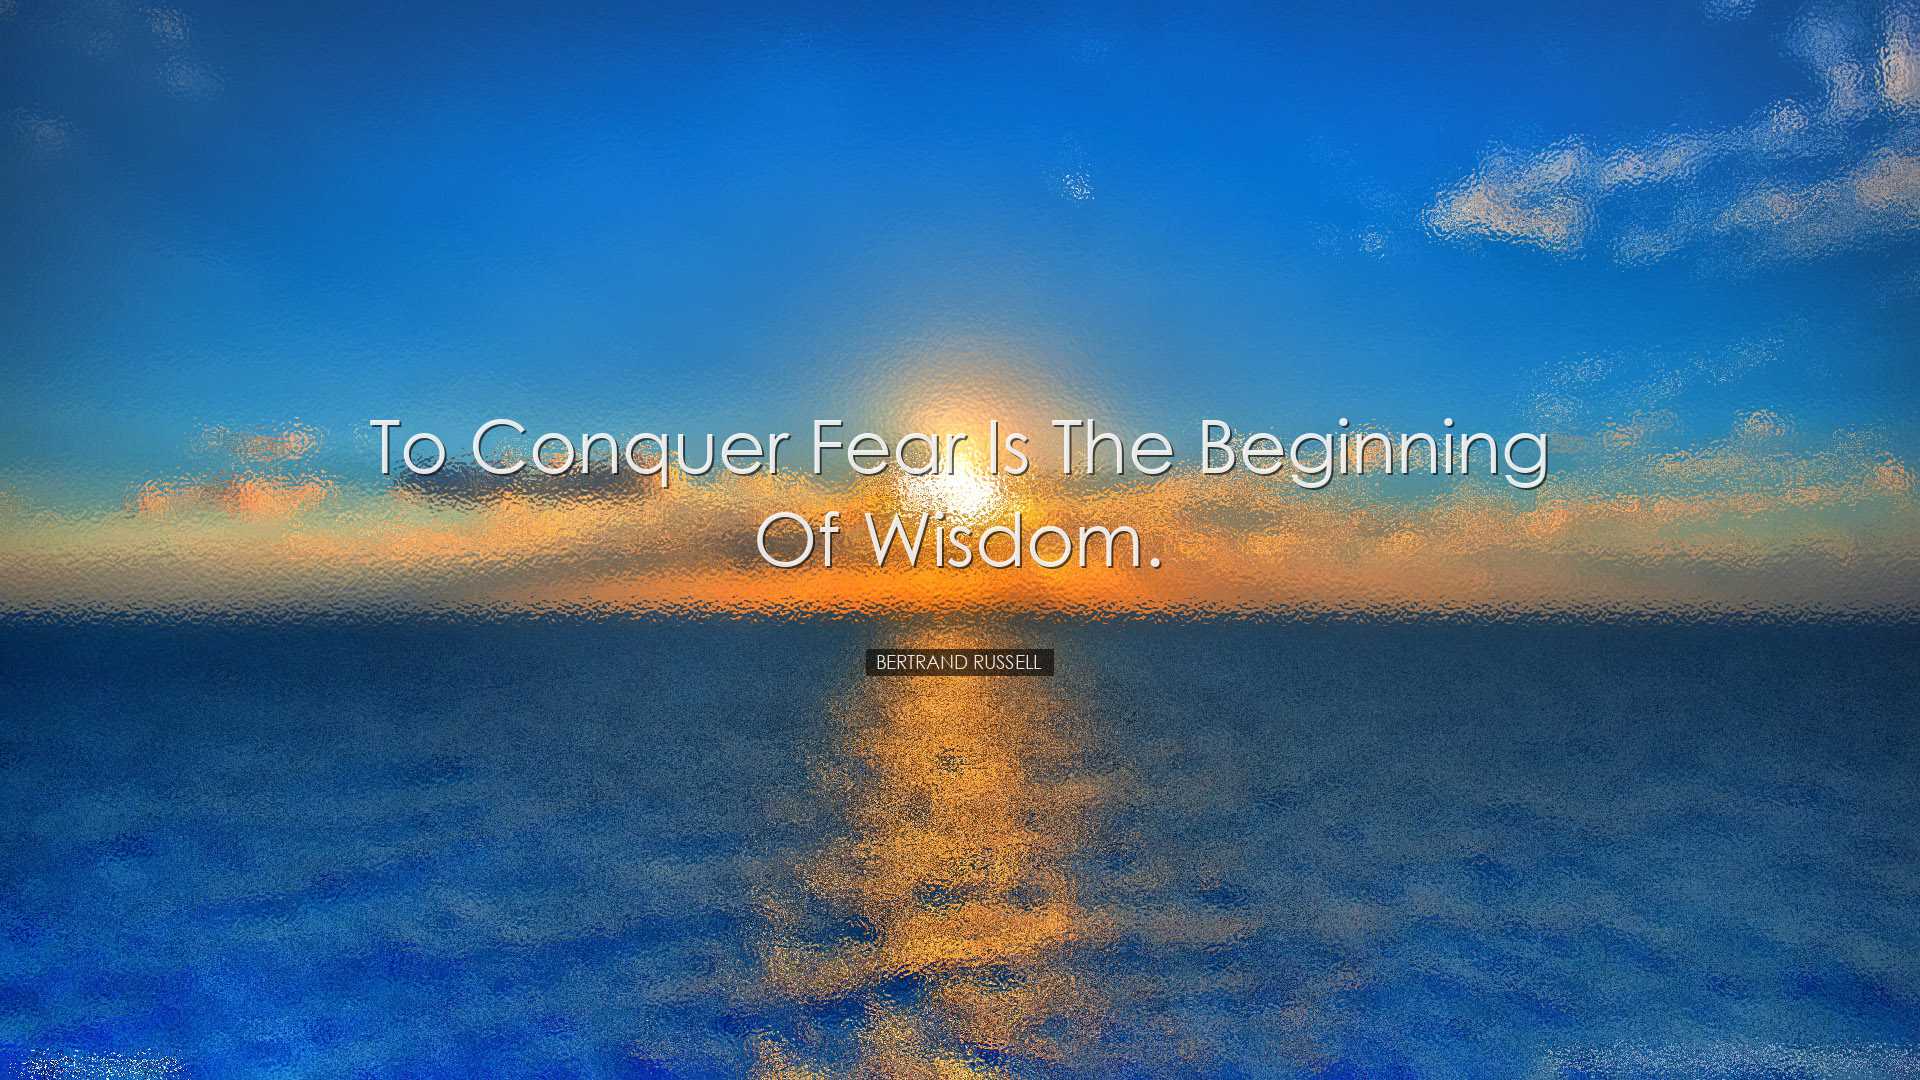 To conquer fear is the beginning of wisdom. - Bertrand Russell